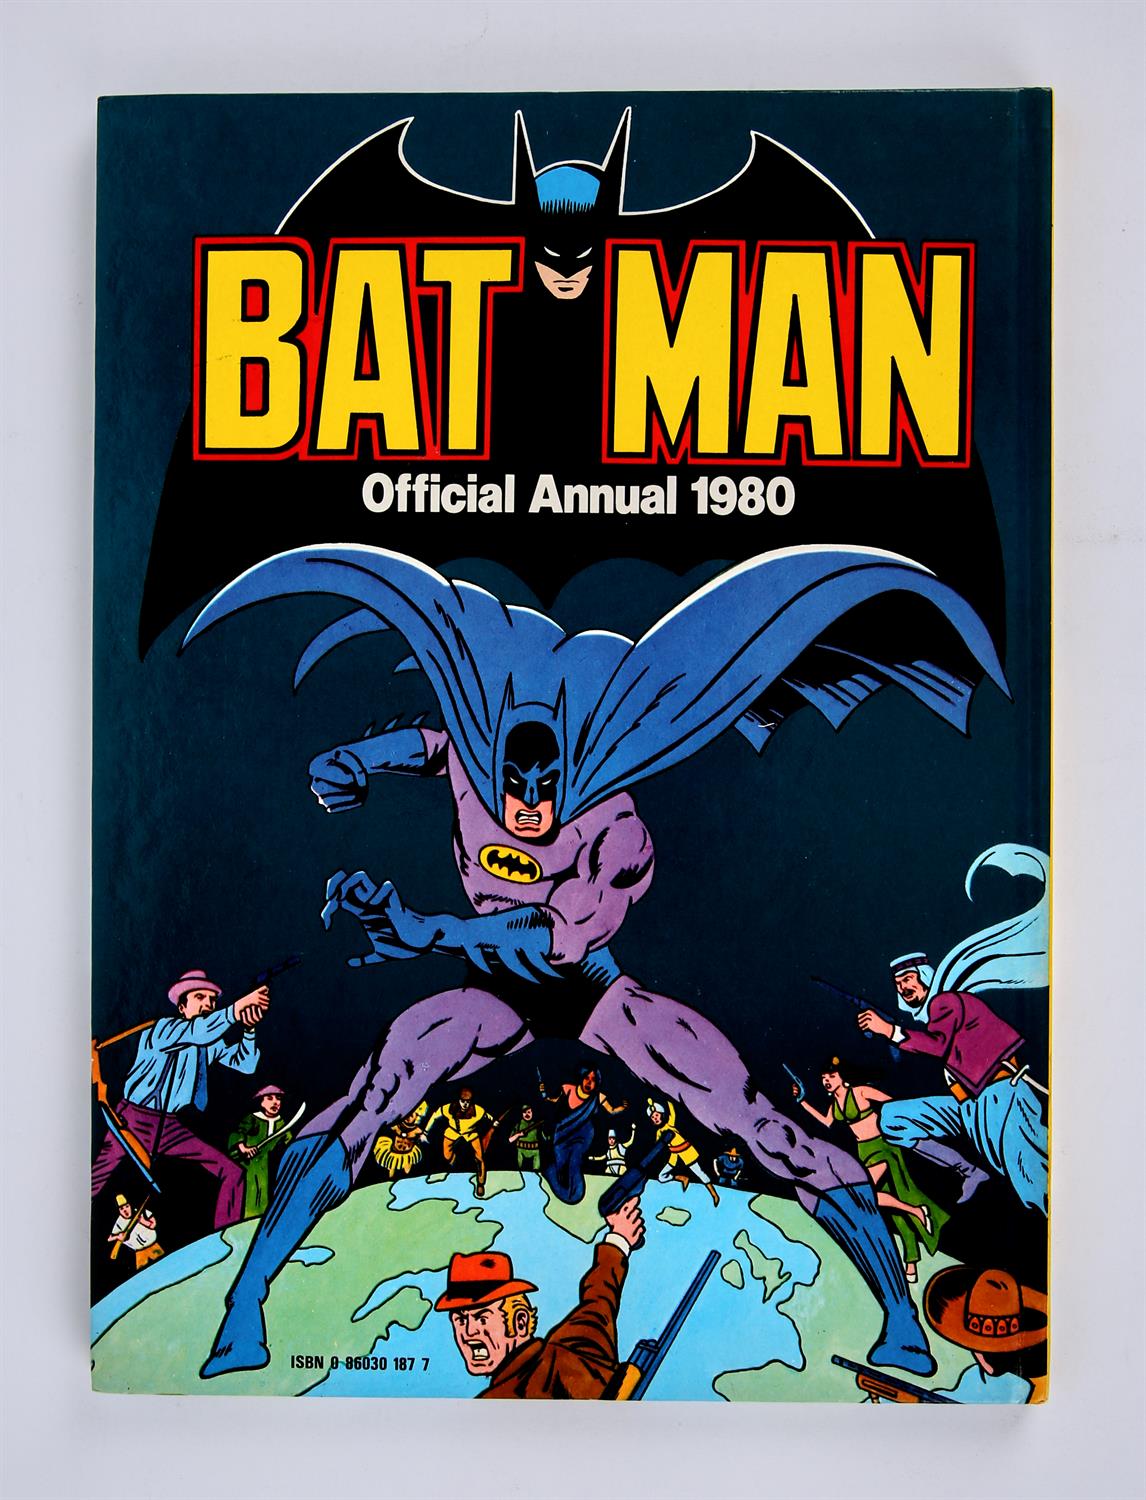 Batman Annual 1980 Signed by Adam West (1980) This lot features: Batman official Annual 1980, - Image 2 of 3